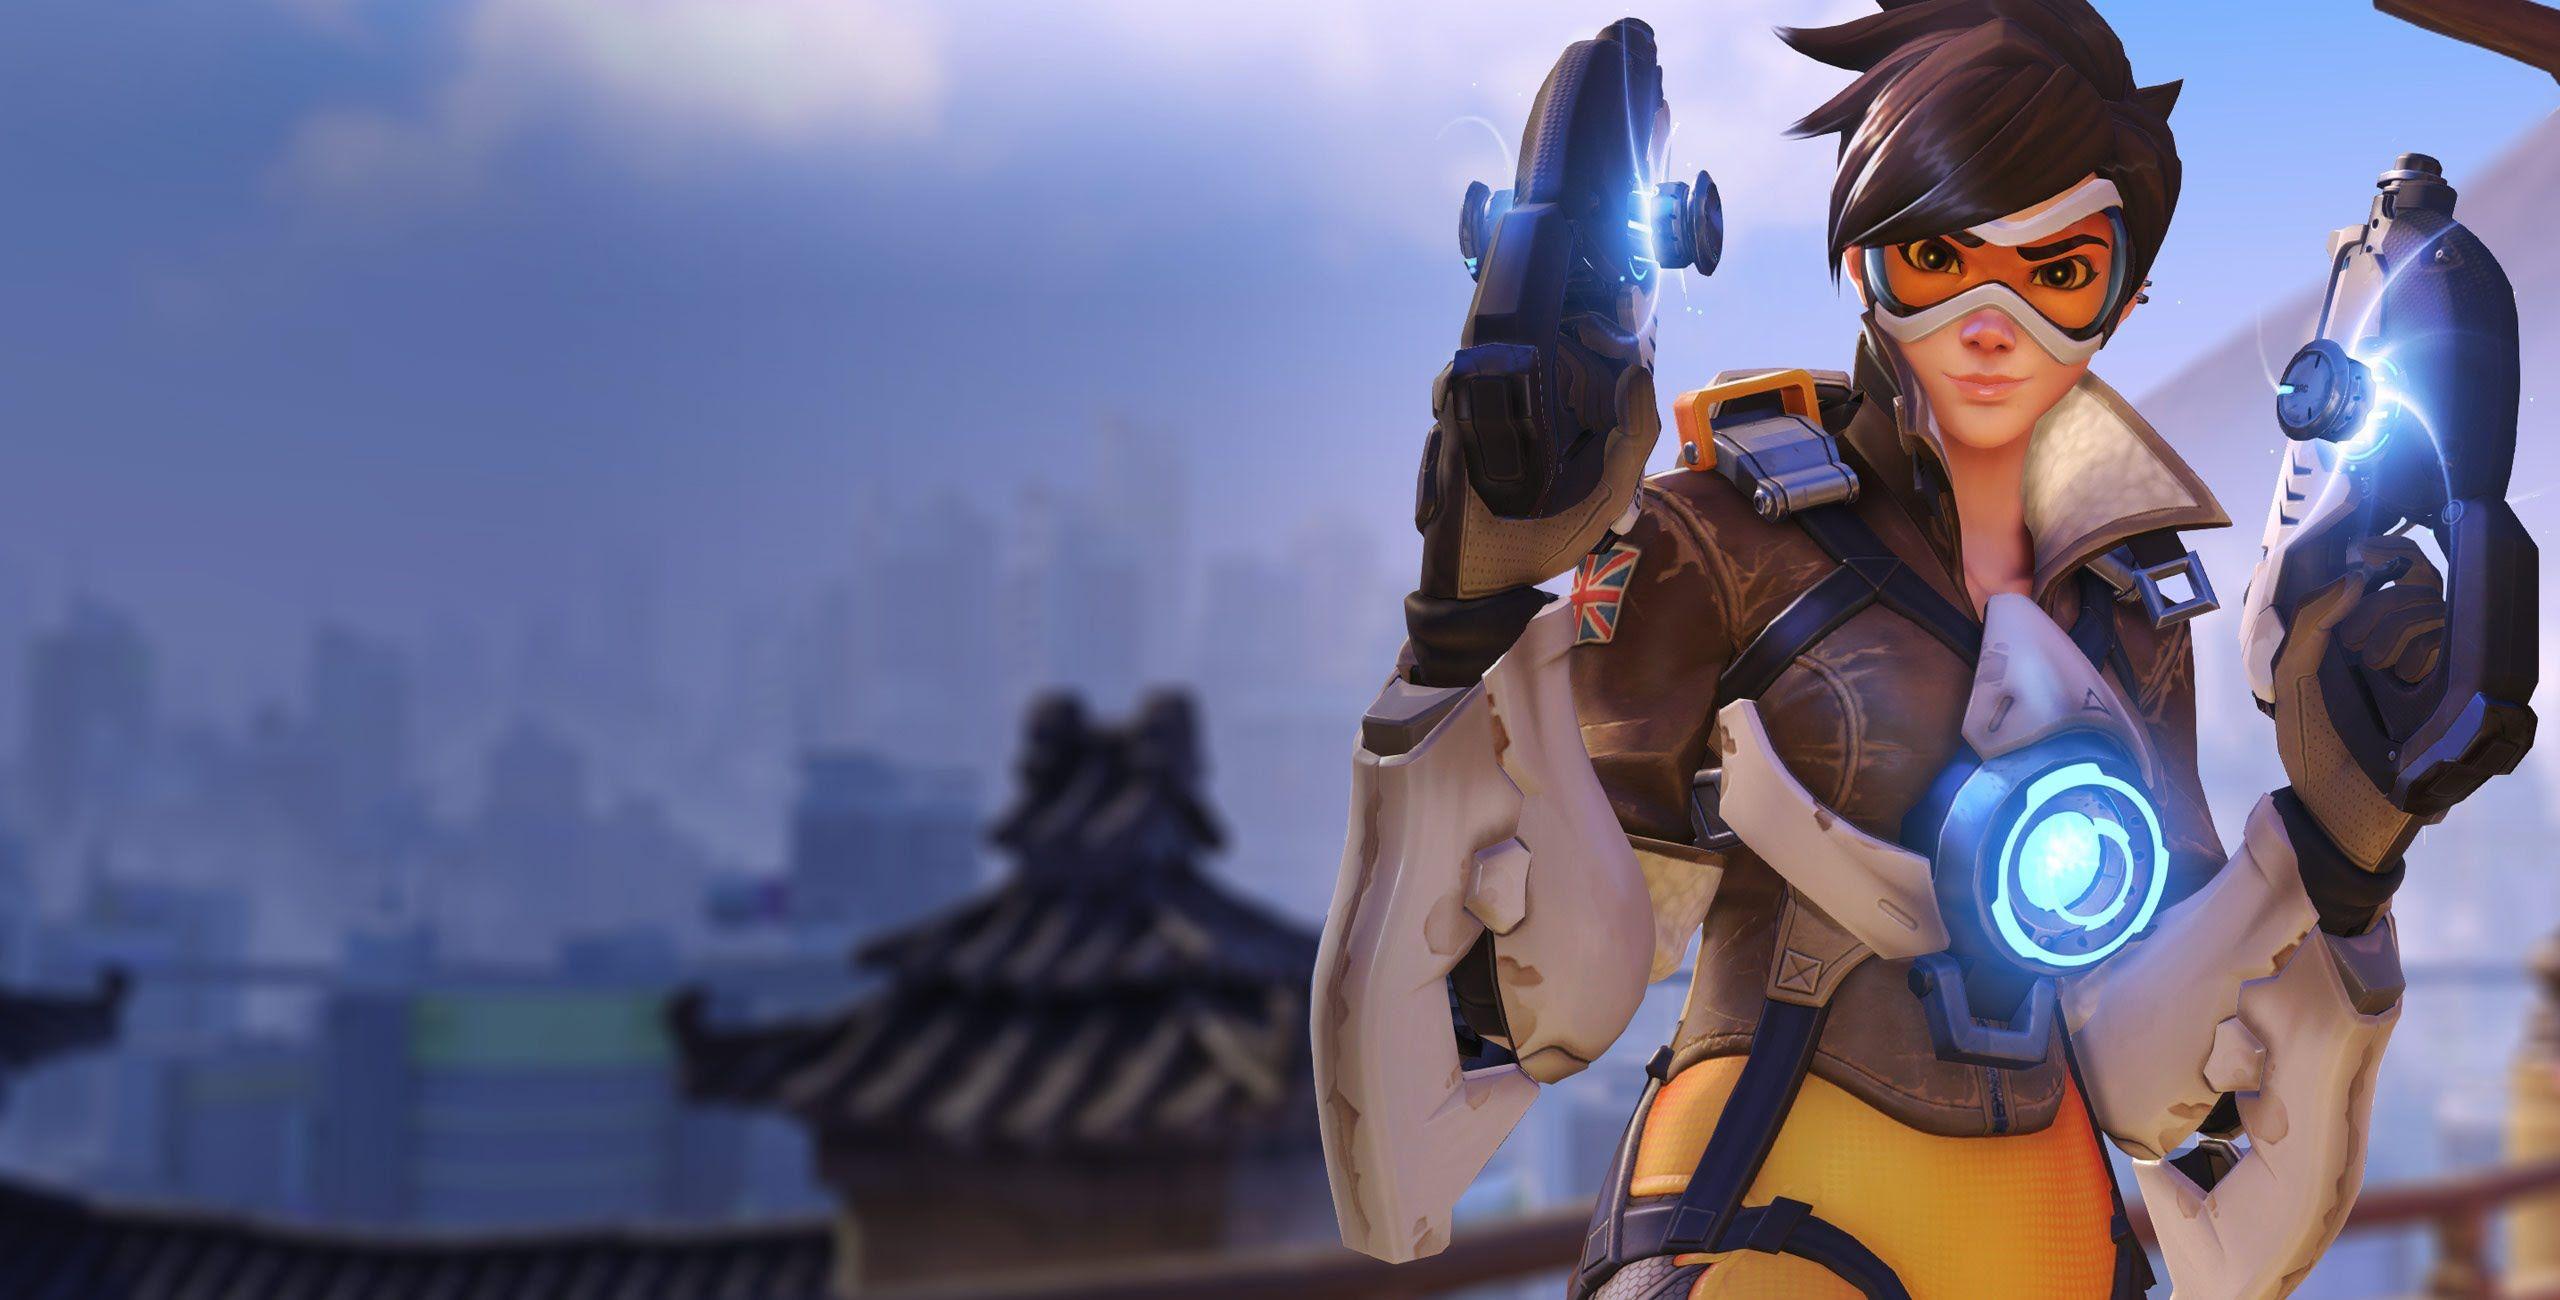 Blizzard's Overwatch image Tracer HD wallpaper and background